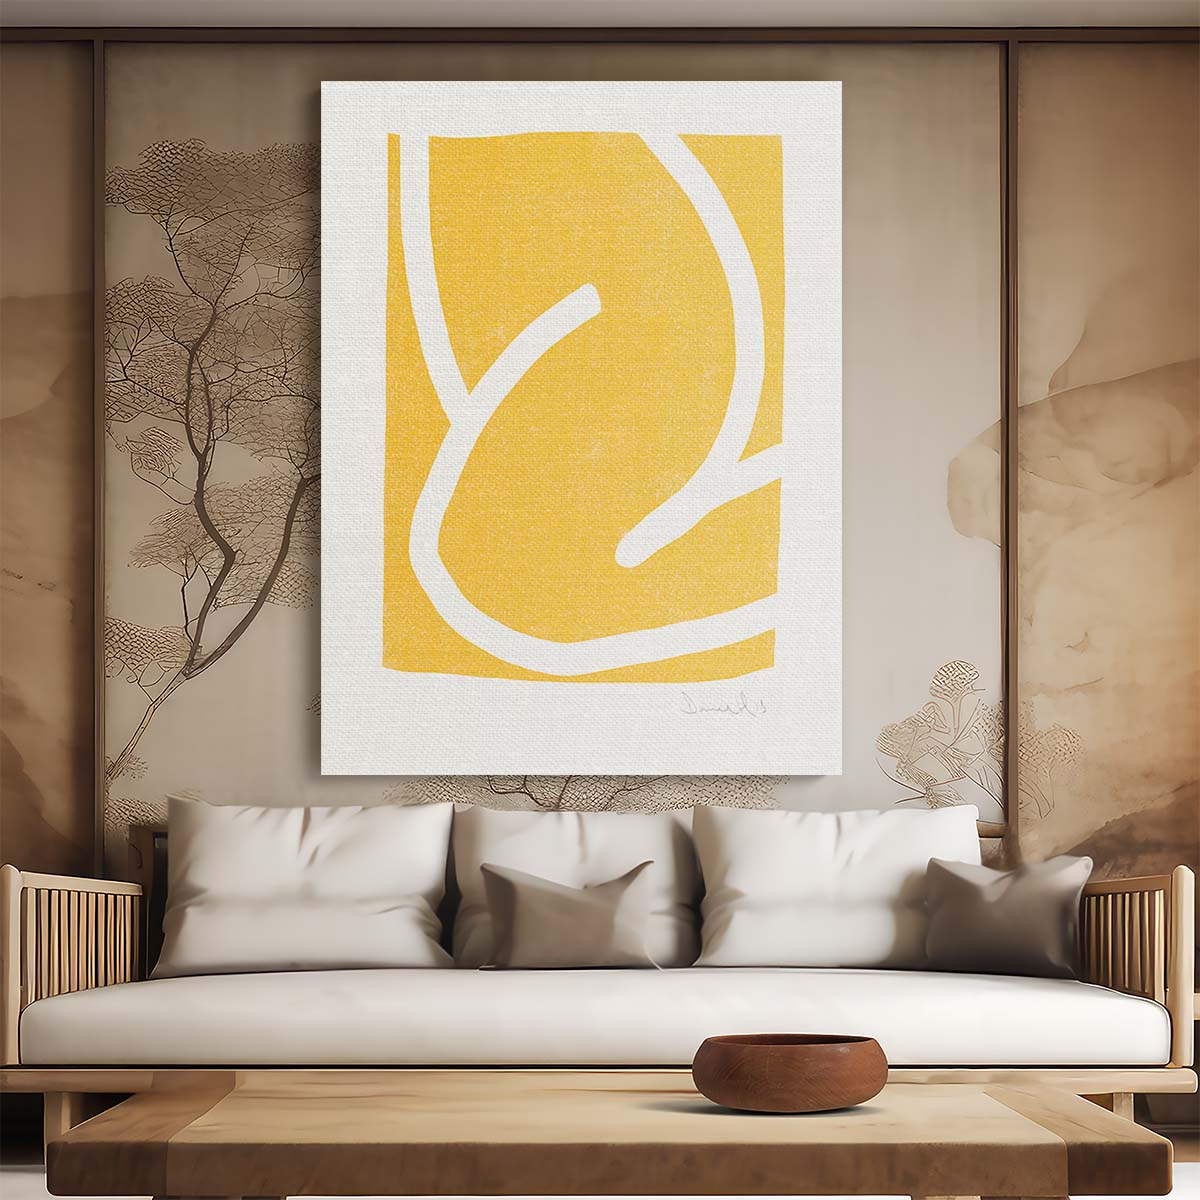 Dan Hobday's Minimalist Colorful Abstract Illustration Mellow by Luxuriance Designs, made in USA